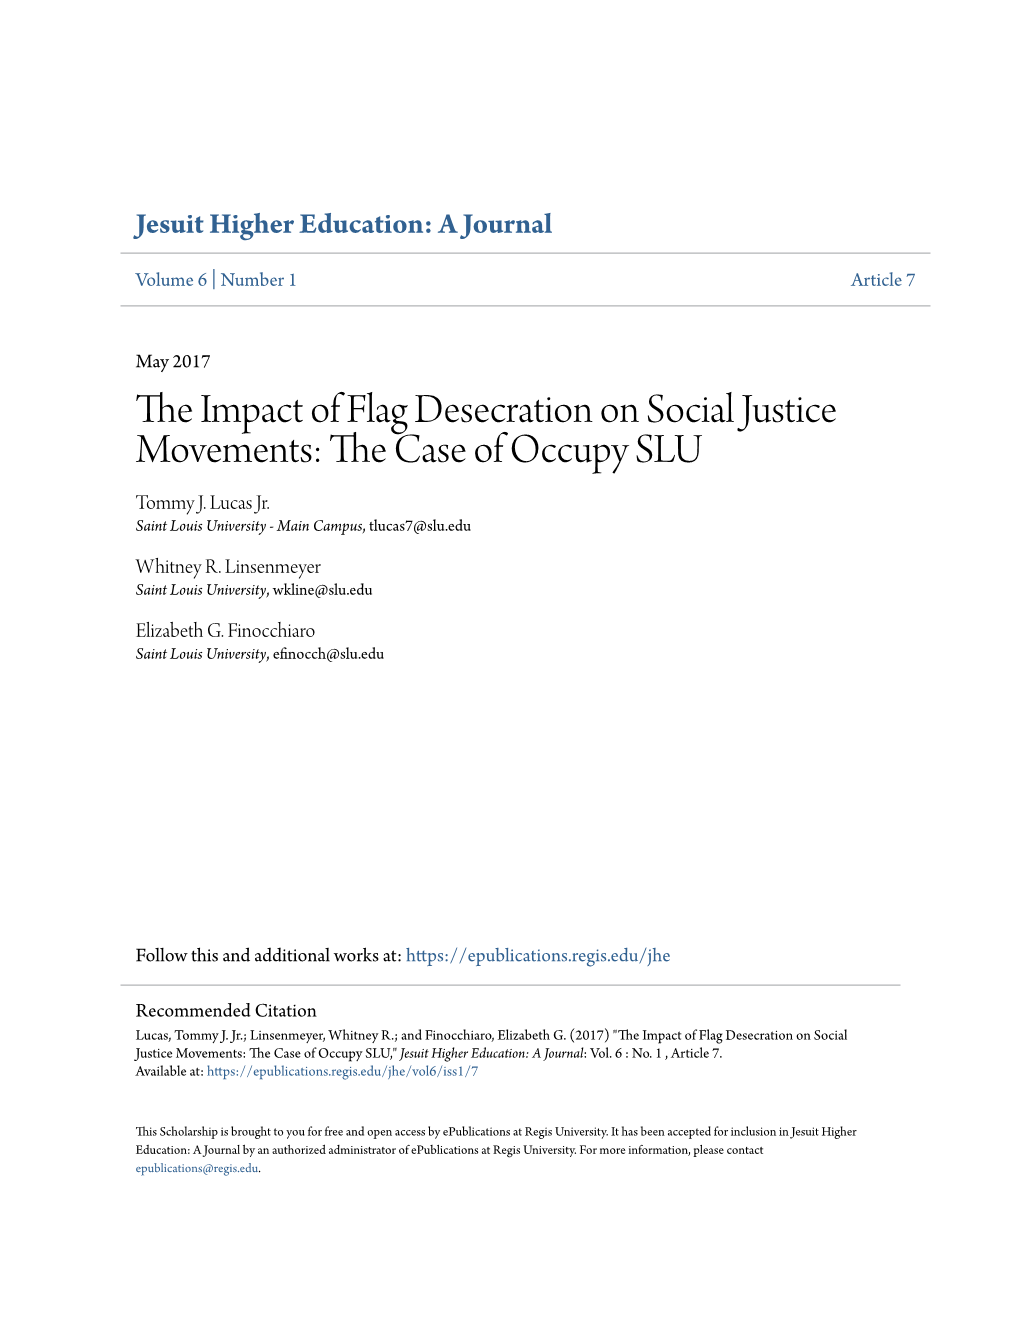 The Impact of Flag Desecration on Social Justice Movements